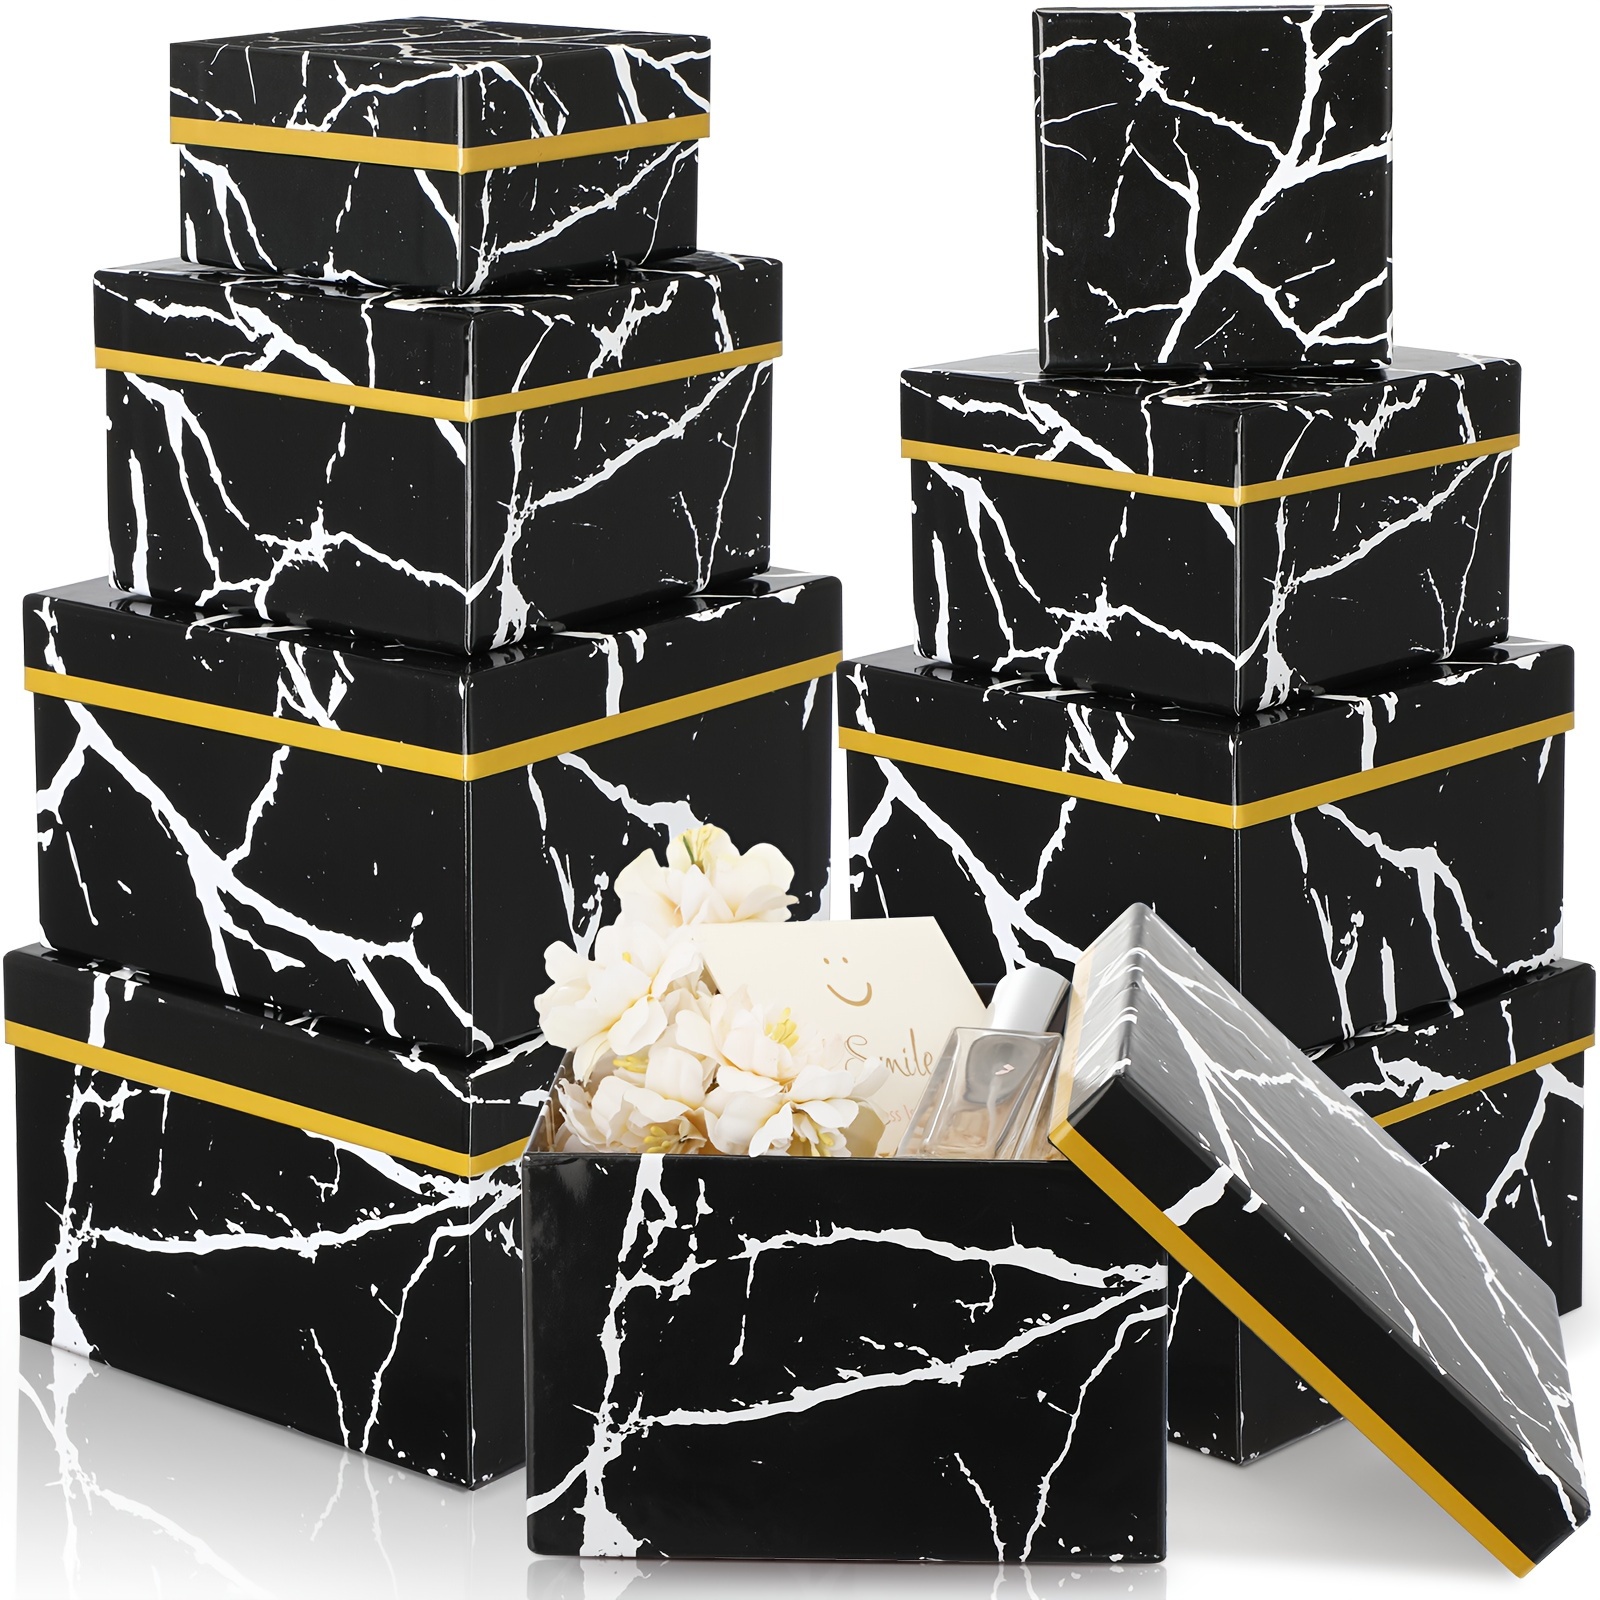 

8 Set Square Nesting Gift Boxes With Lids For Presents Marble Floral Boxes Arrangements Flowers Boxes 4 Assorted Sizes With Bow For Wedding Nurse Gift Bridal Shower (black And White, Square)